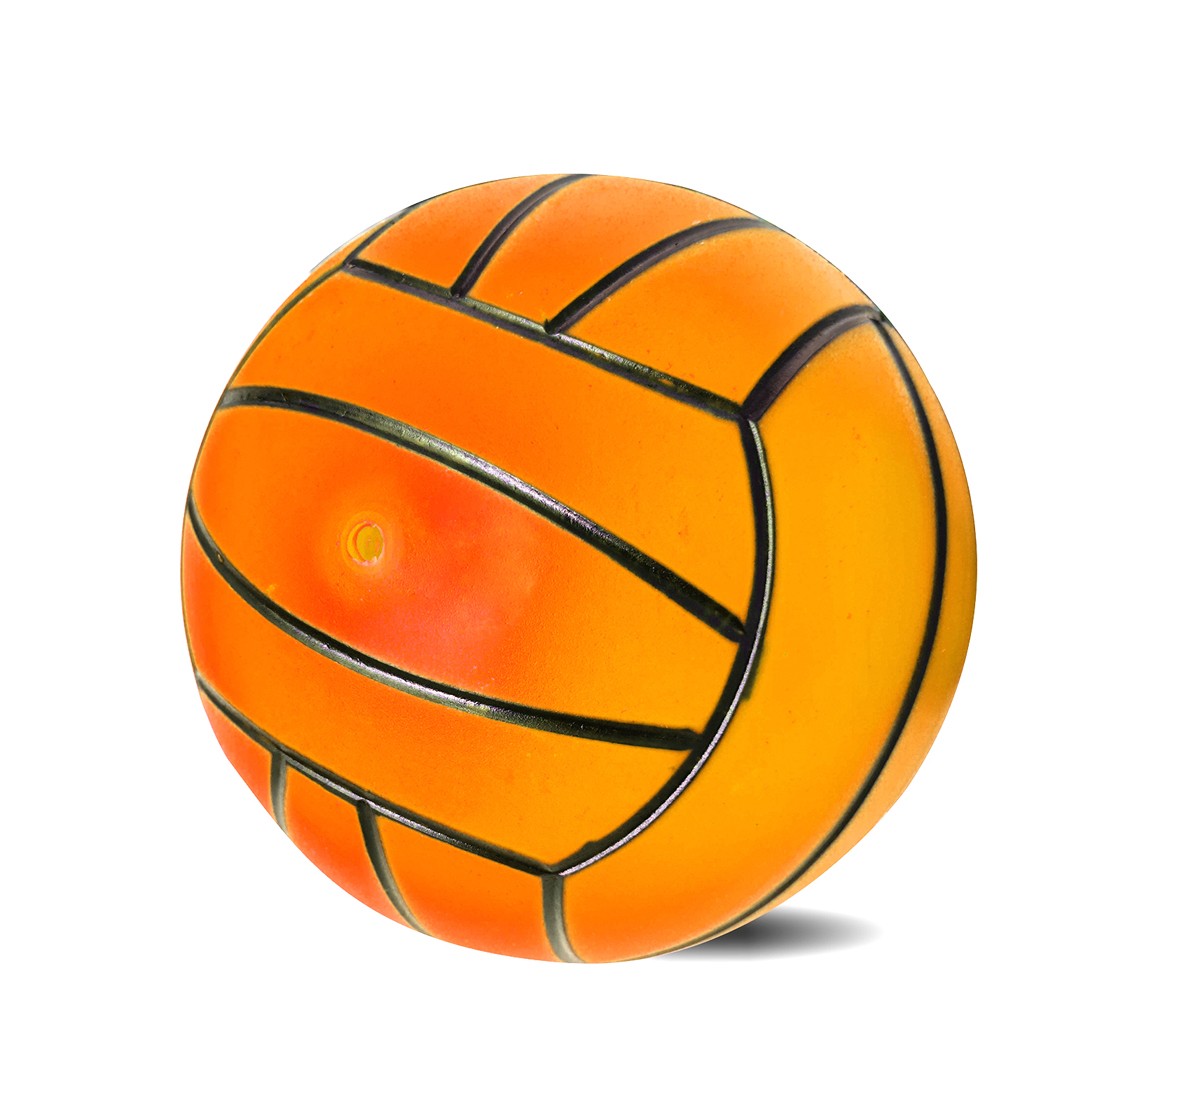 Zoozi 9Inch Volley Ball For Kids 3Y+, Orange